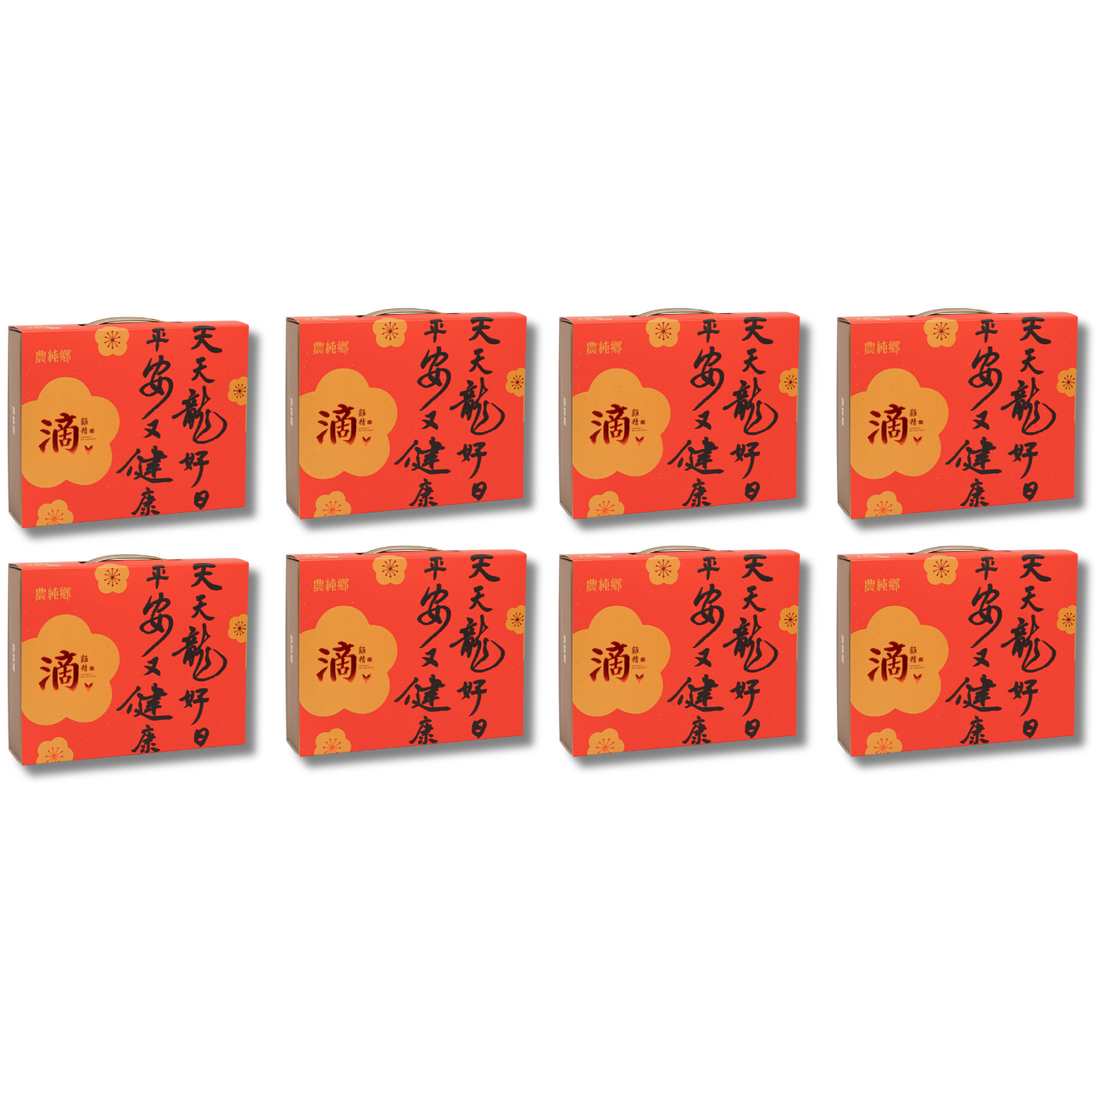 Nong Chun Xiang Chicken Essence【Dragon Year Limited Edition】 x 8 packs【Two Months Confinement】